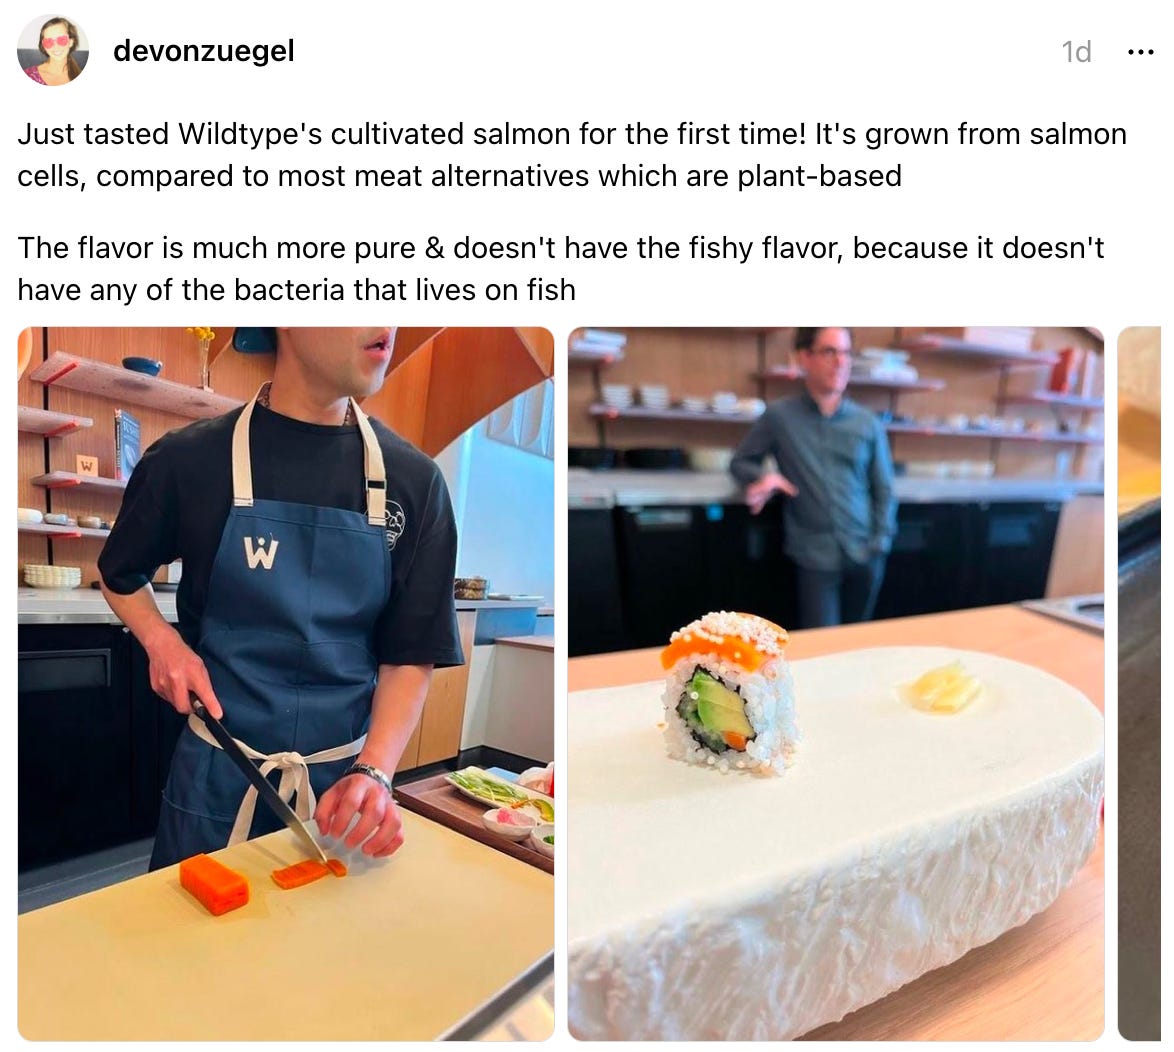  devonzuegel 1d Just tasted Wildtype's cultivated salmon for the first time! It's grown from salmon cells, compared to most meat alternatives which are plant-based  The flavor is much more pure & doesn't have the fishy flavor, because it doesn't have any of the bacteria that lives on fish